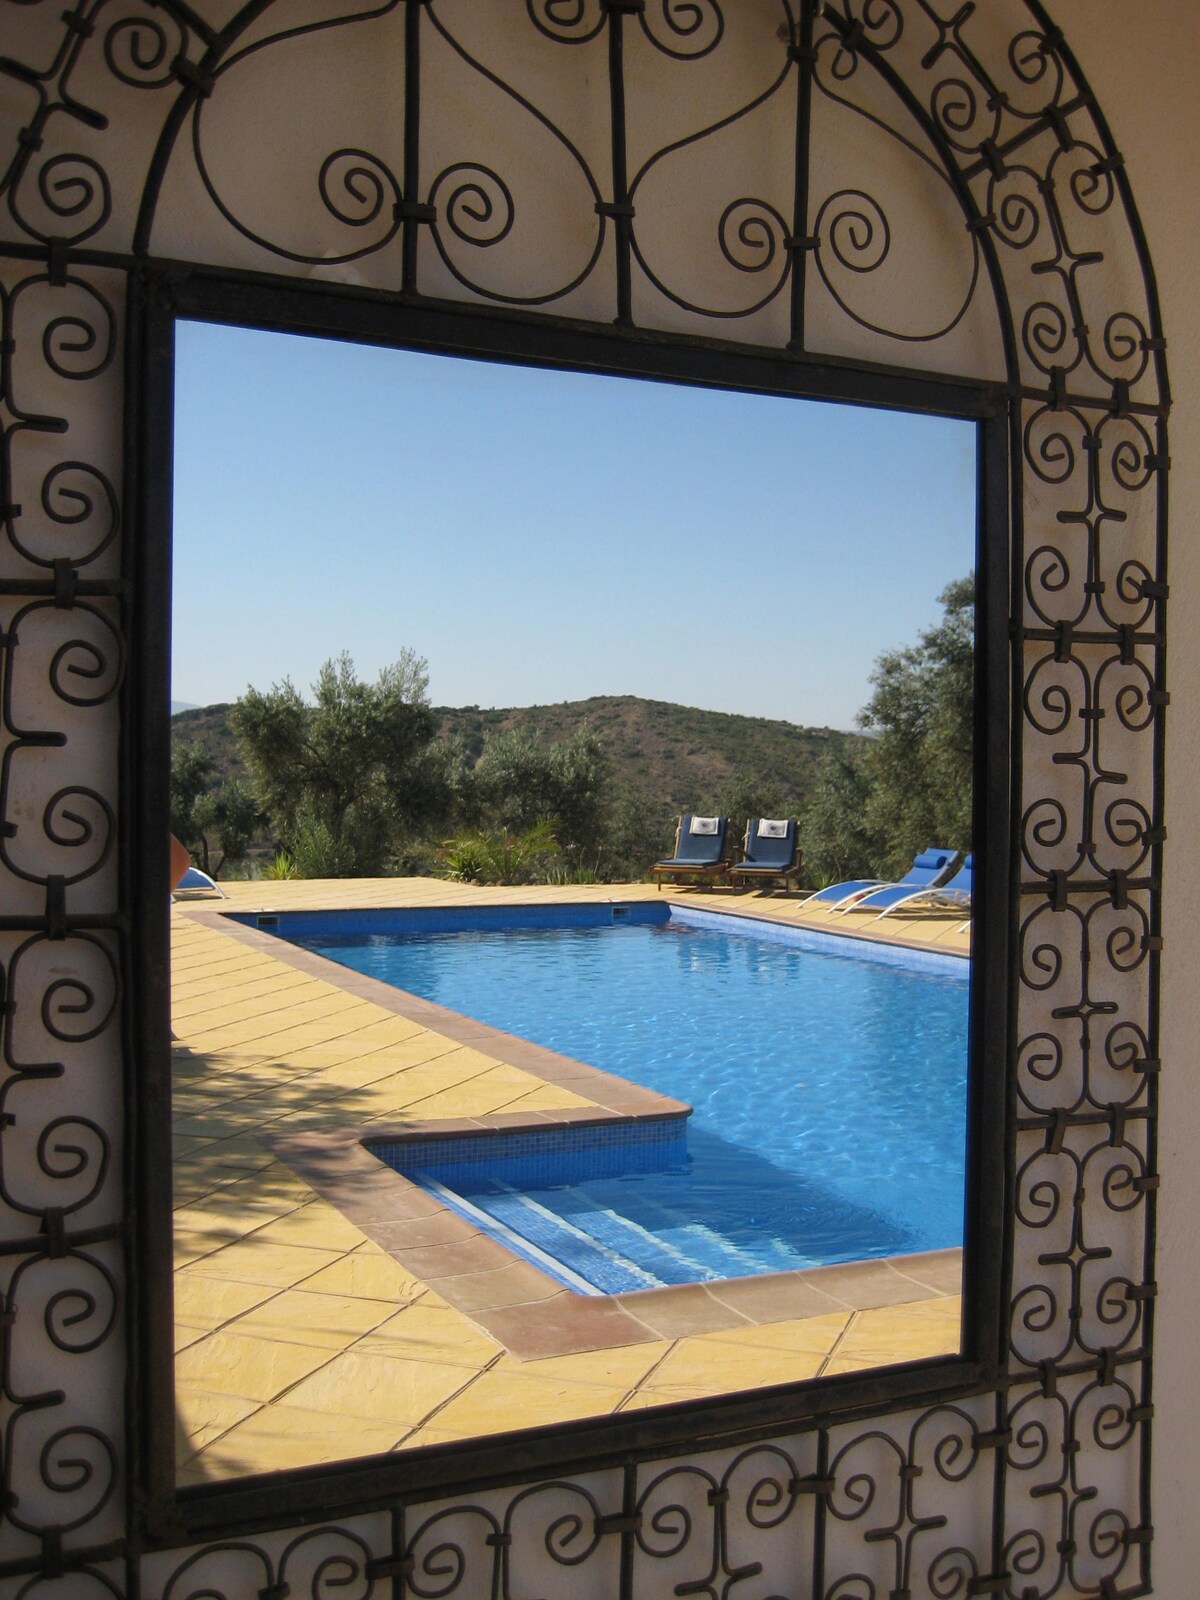 Lovely villa with fabulous 12m pool and jacuzzi